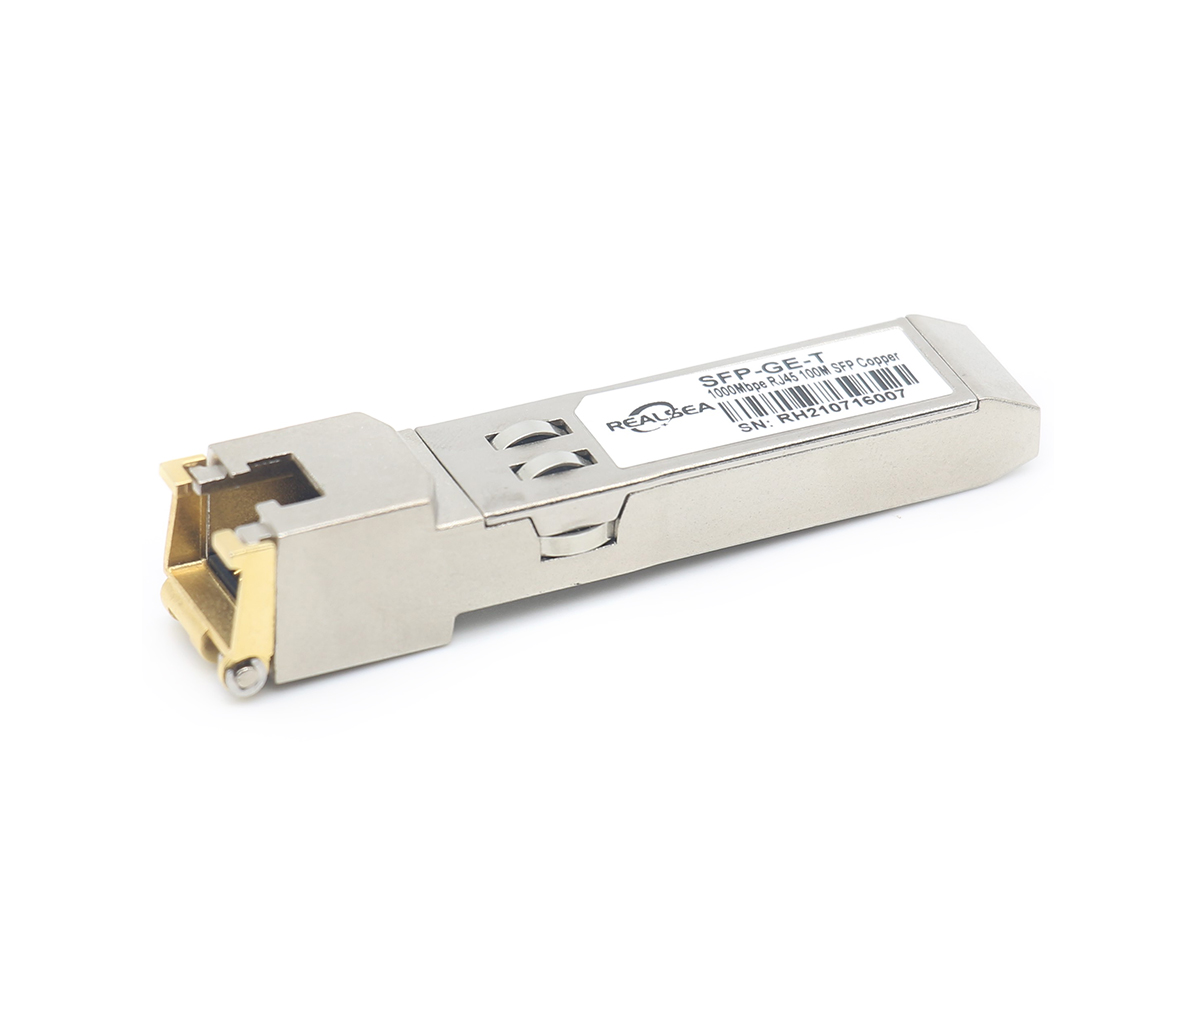 MPO polarity classification of three line sequence SFPs.Miktrotik compatible SFP optical transceiver